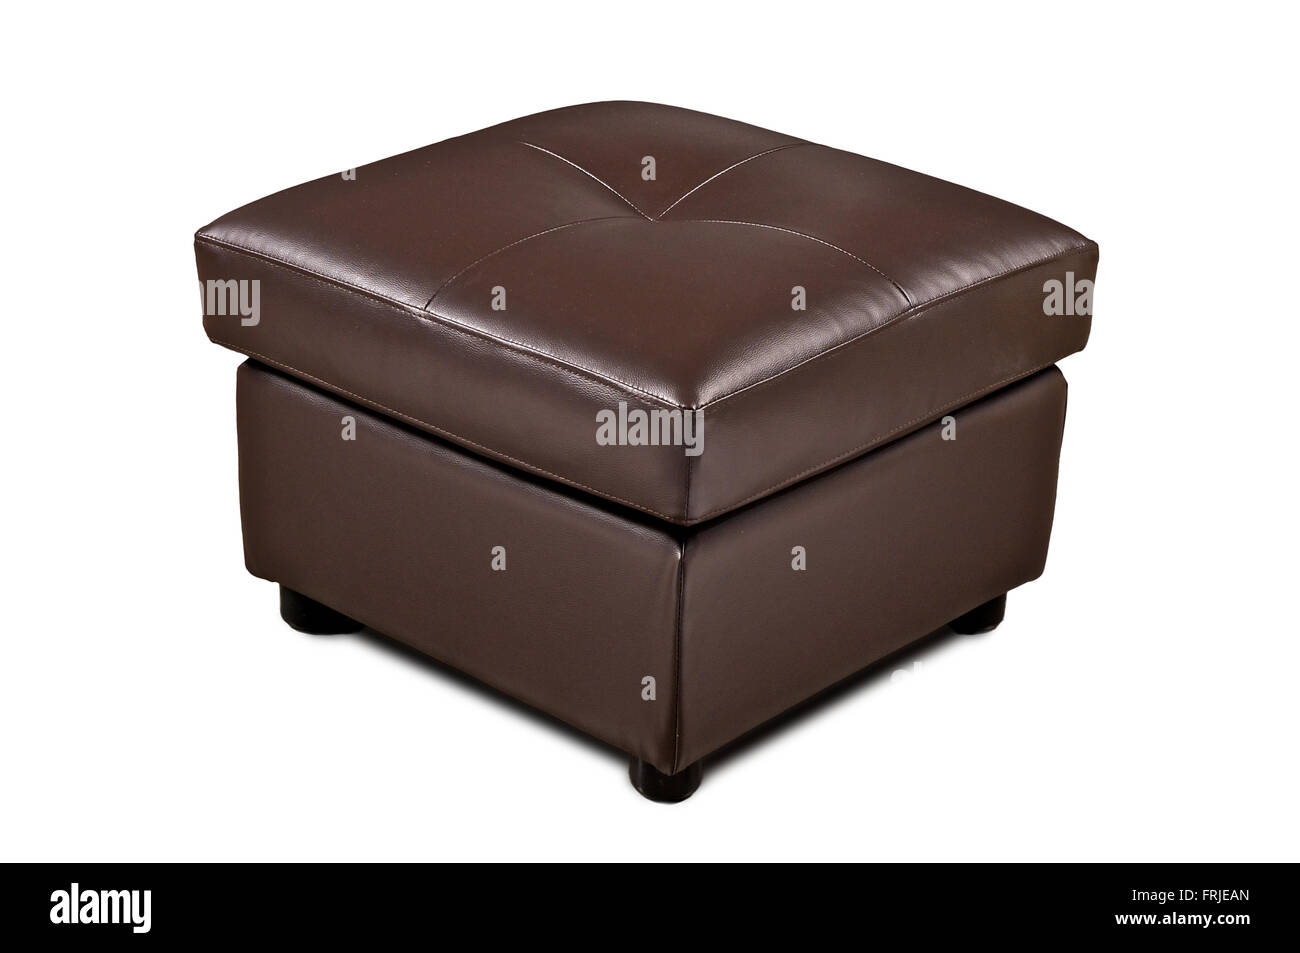 Brown leather stool on white background Stock Photo